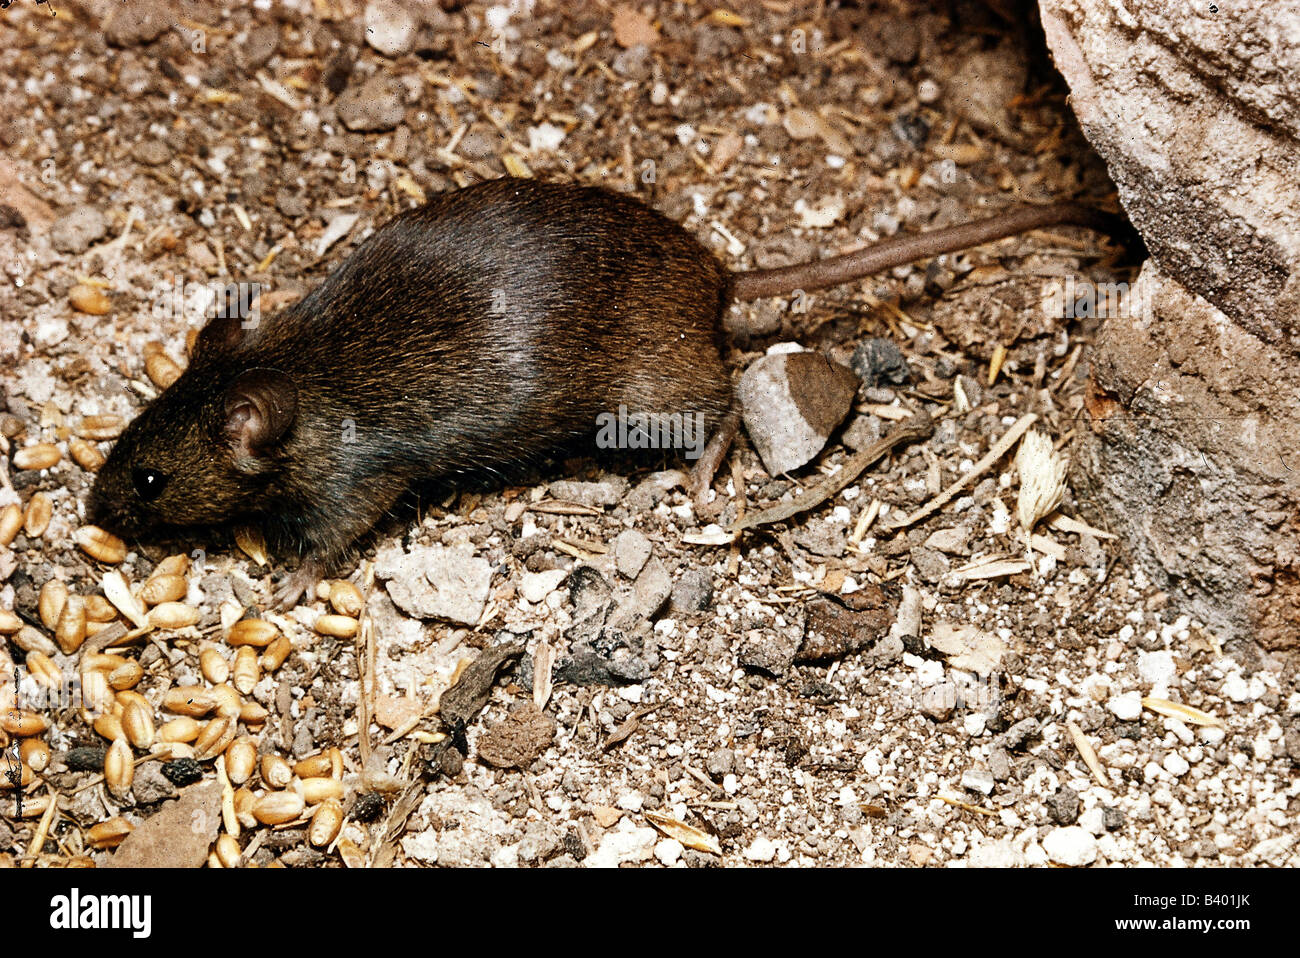 zoology / animals, mammal / mammalian, mouse, dormouse, (Mus musculus domesticus), distribution: Europe, mouses, rodent, rodents Stock Photo